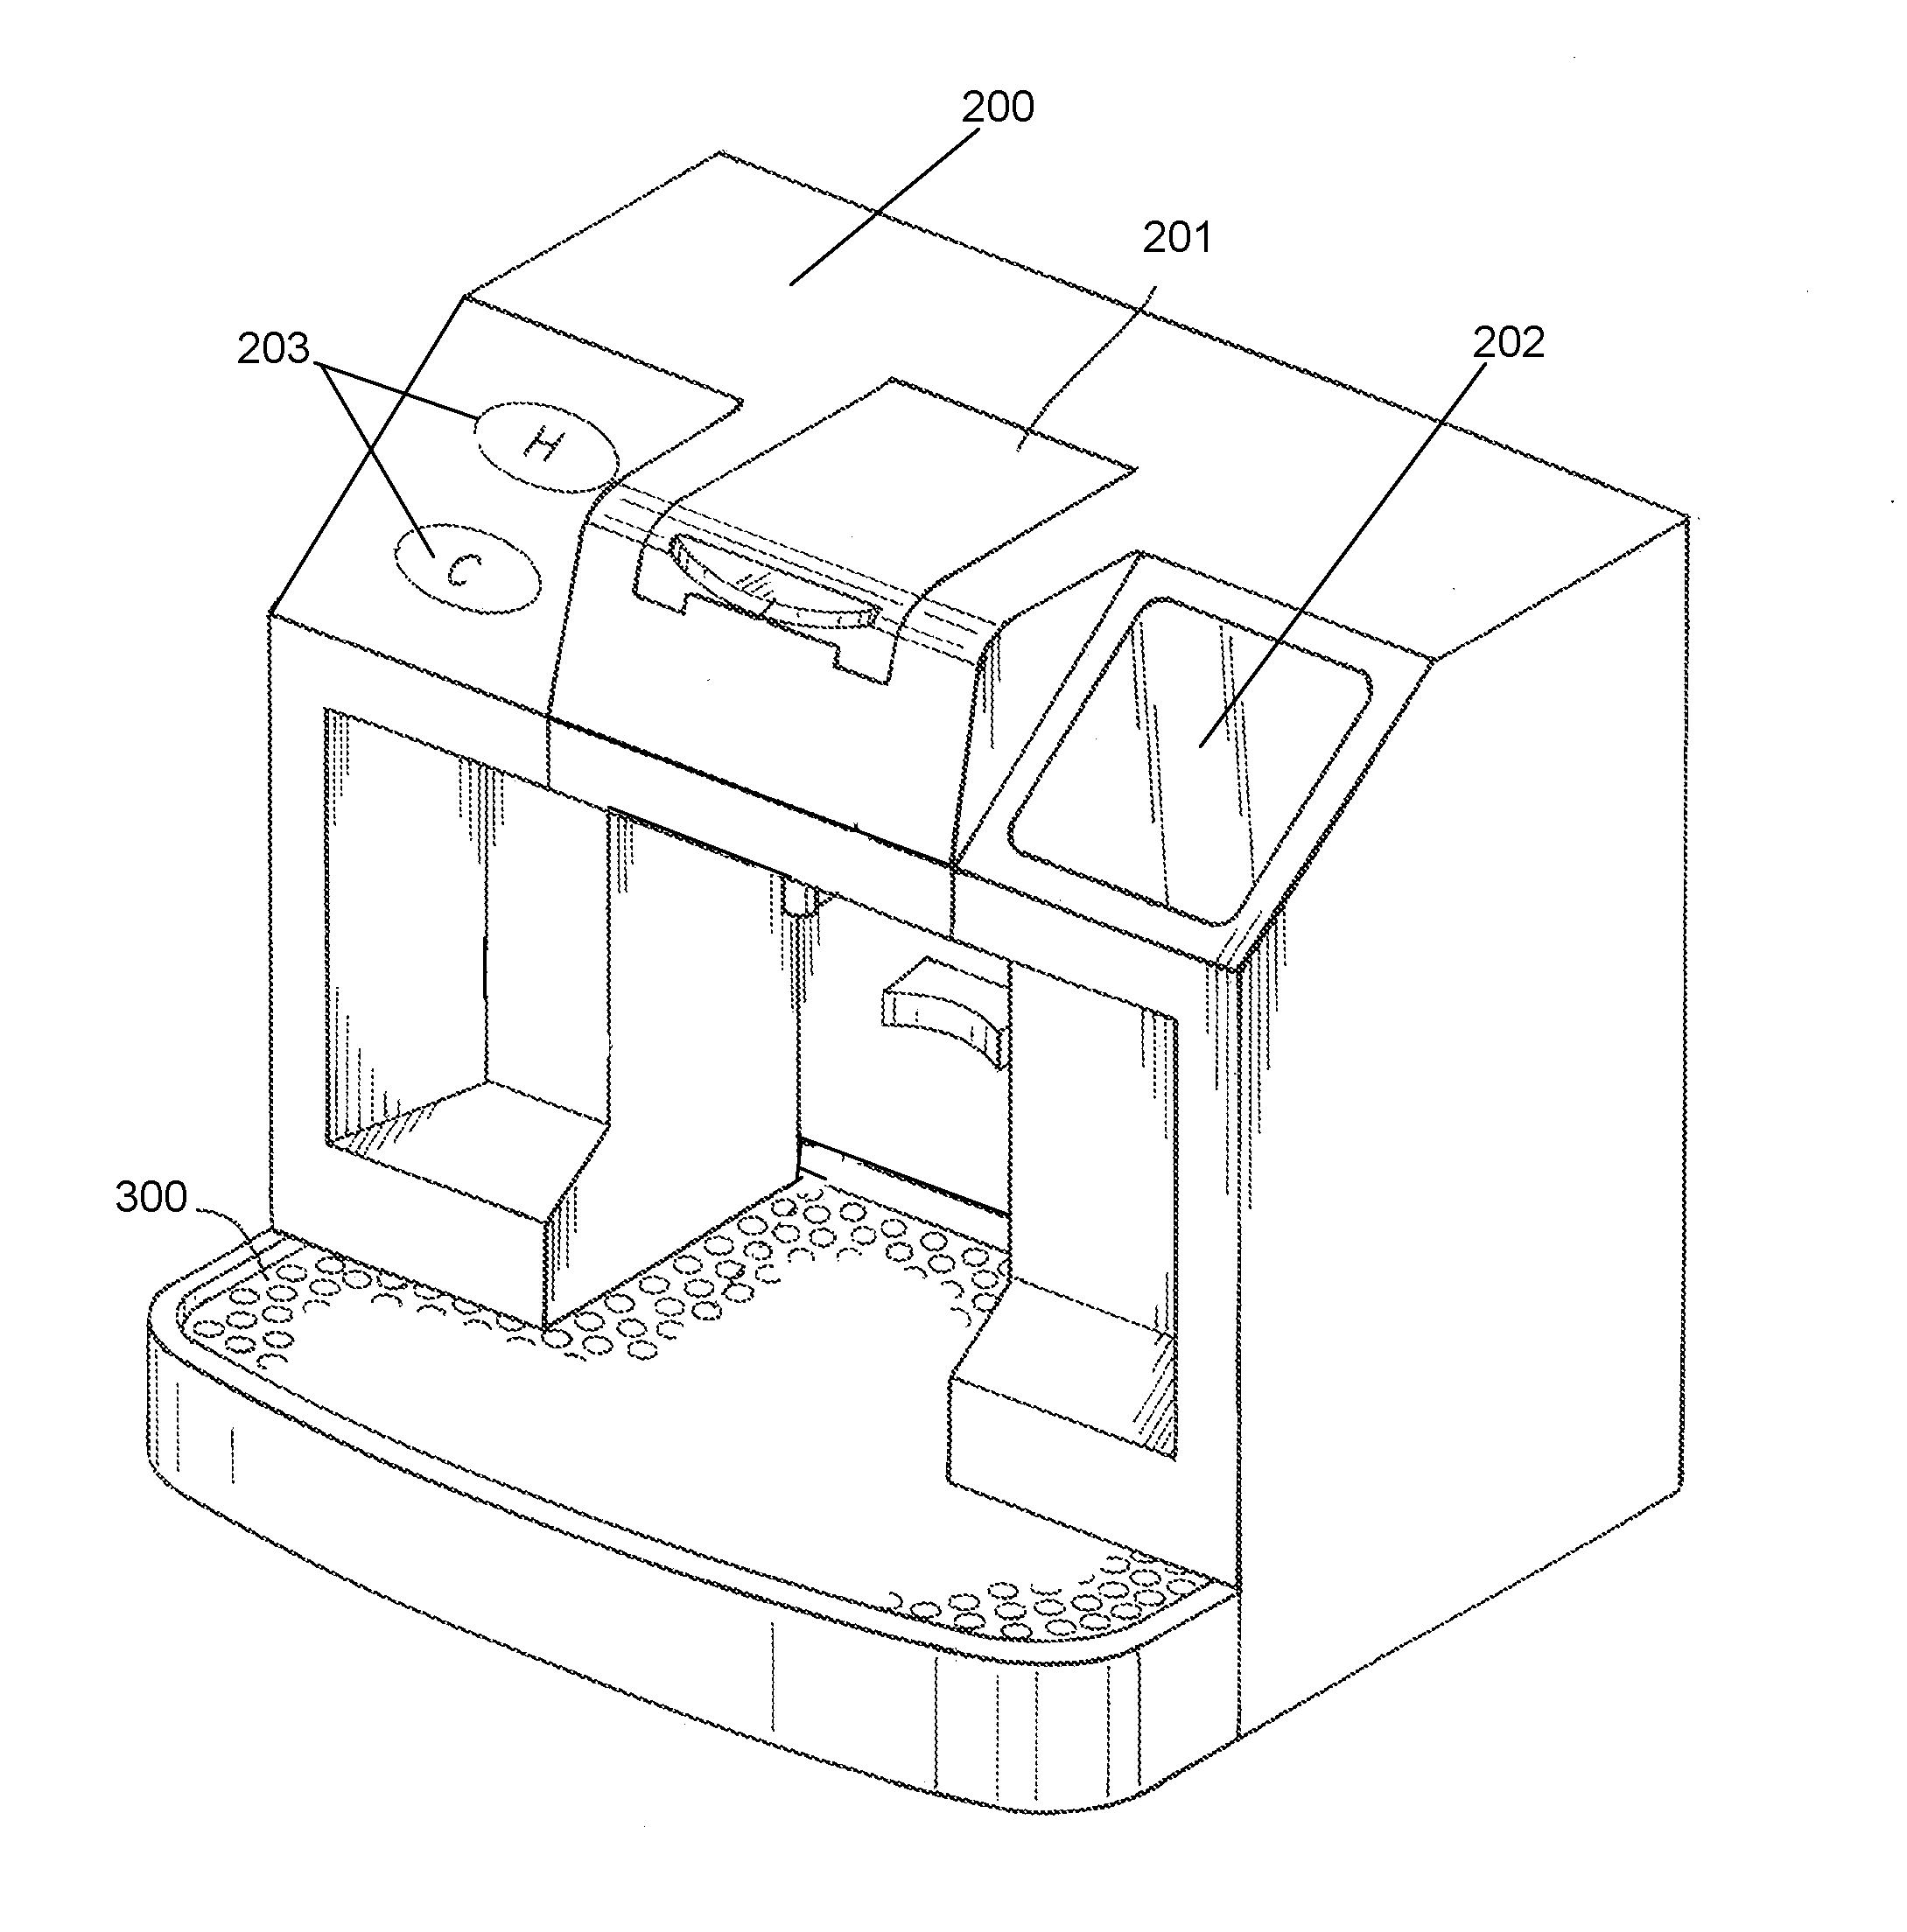 Capsule-Based System for Preparing and Dispensing a Beverage